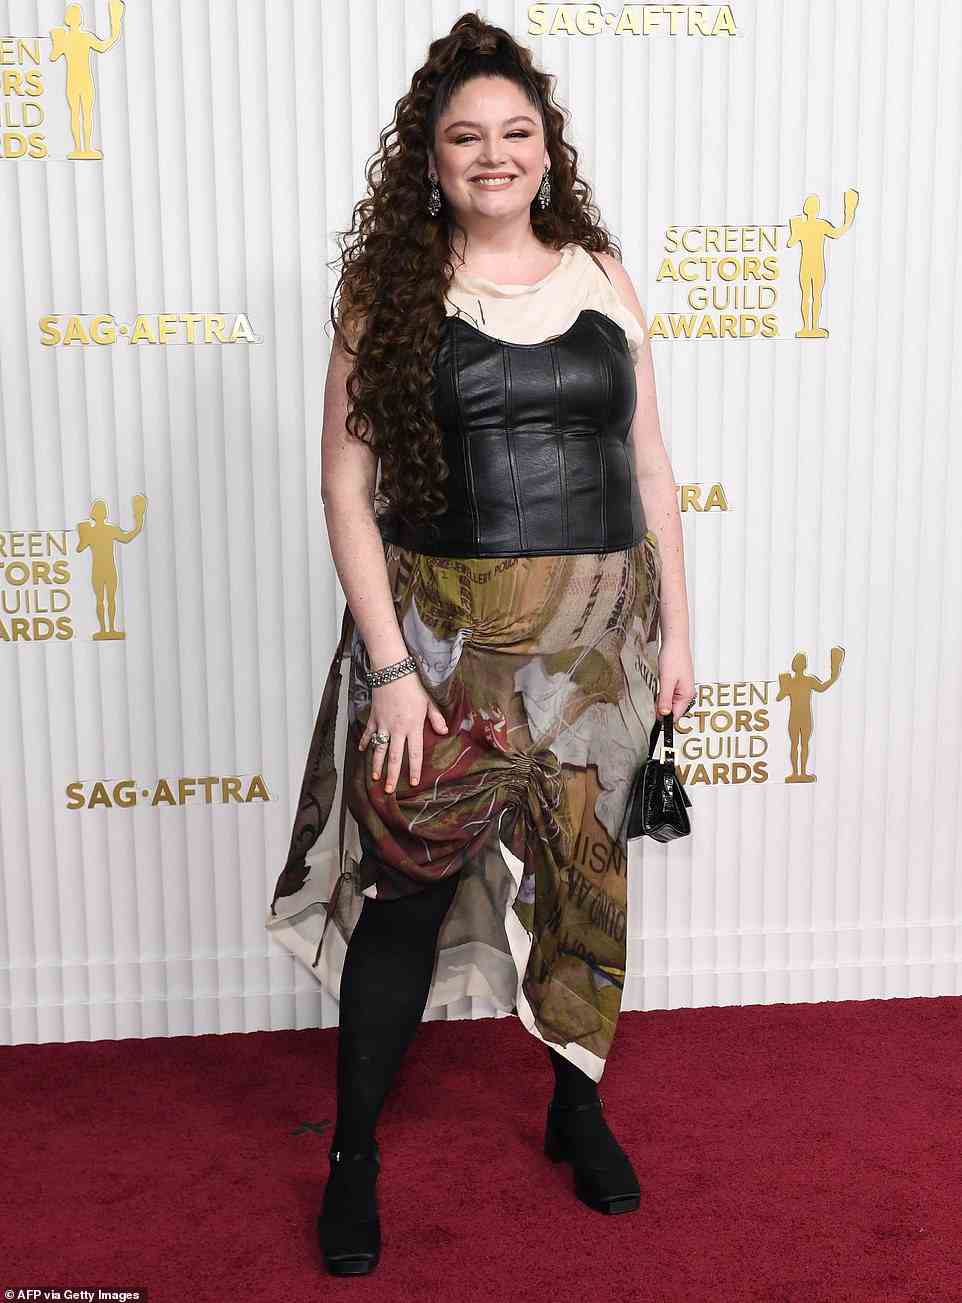 Comedian Megan Stalter flashed back to 90s punk style in a leather corset that was wrapped over a baggy dress - leaving the whole thing looking very mis-matched and disorganized